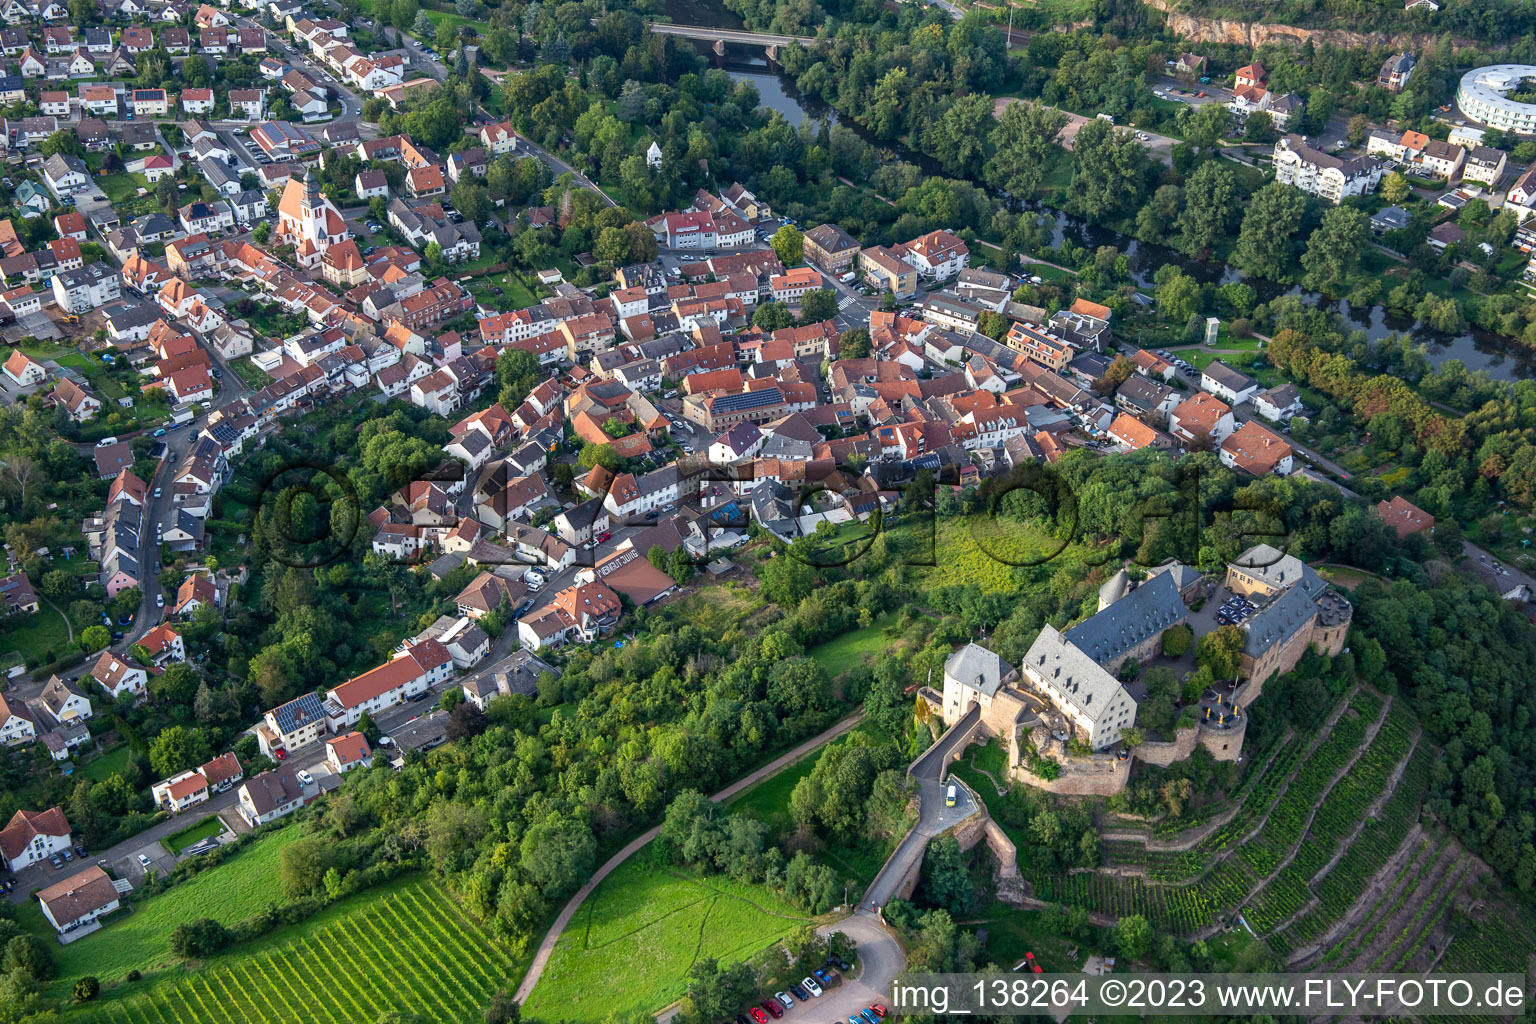 Castle Ebernburg / Protestant family holiday and educational center Ebernburg in the district Ebernburg in Bad Kreuznach in the state Rhineland-Palatinate, Germany seen from above